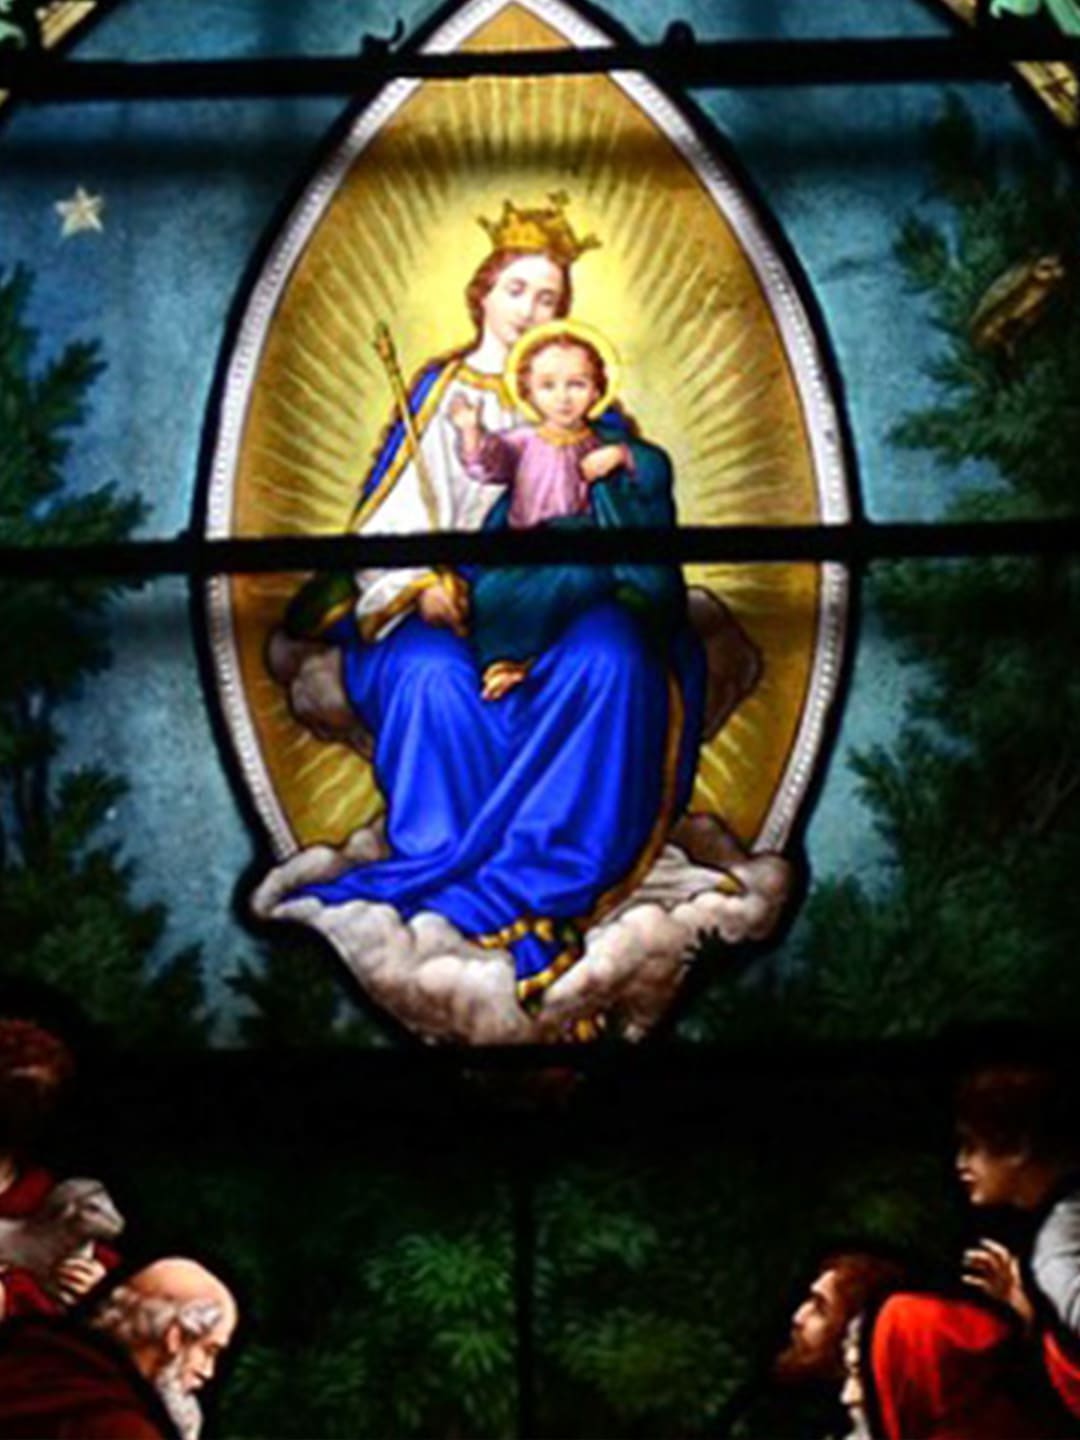 Stain glass of Virgin Mary & Baby Jesus